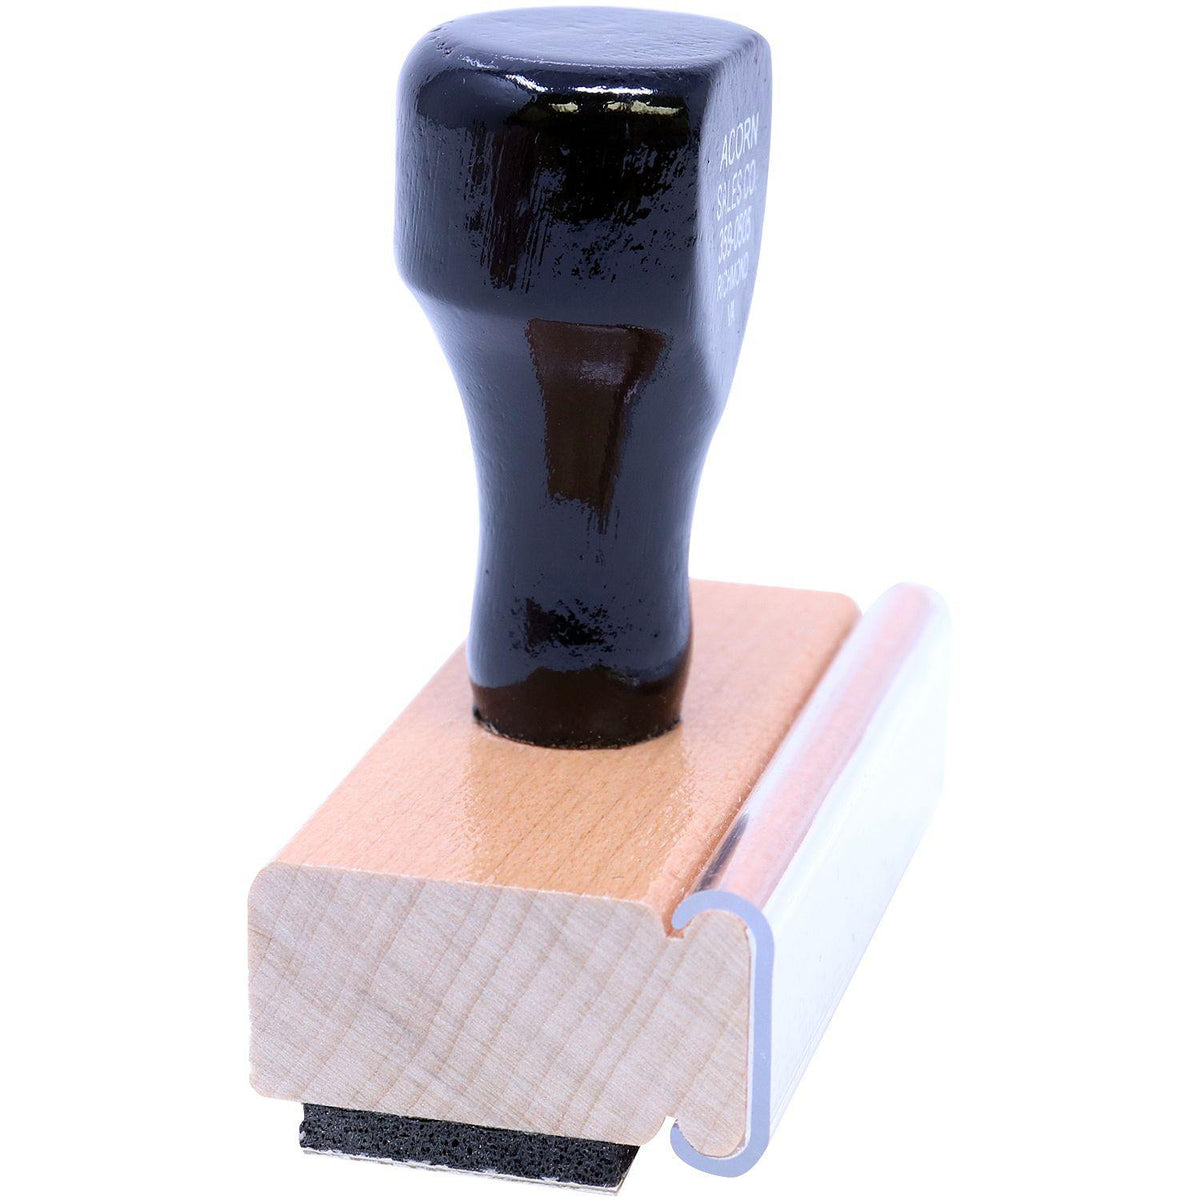 Side View of Large Amortizado Rubber Stamp at an Angle